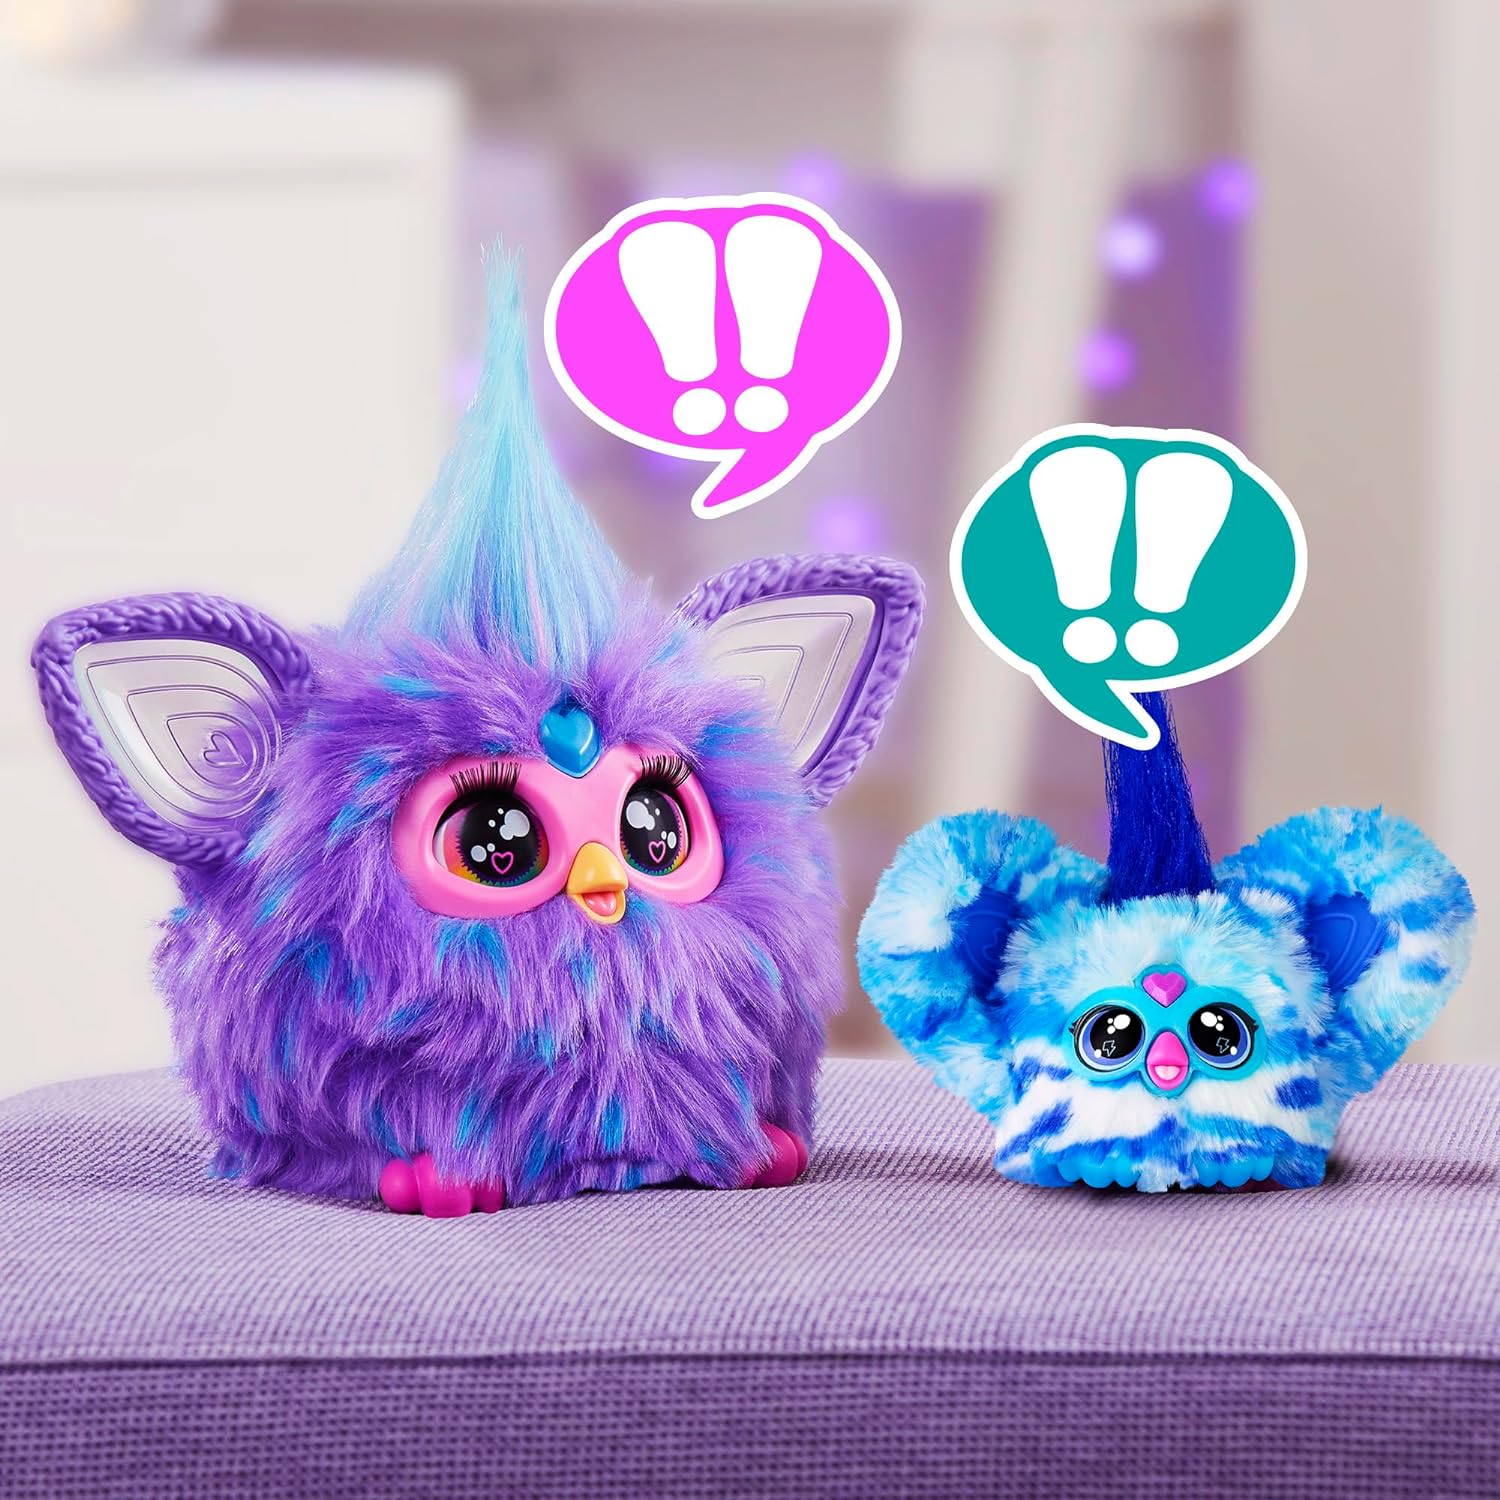 New Furby Furblets are available for preorder on